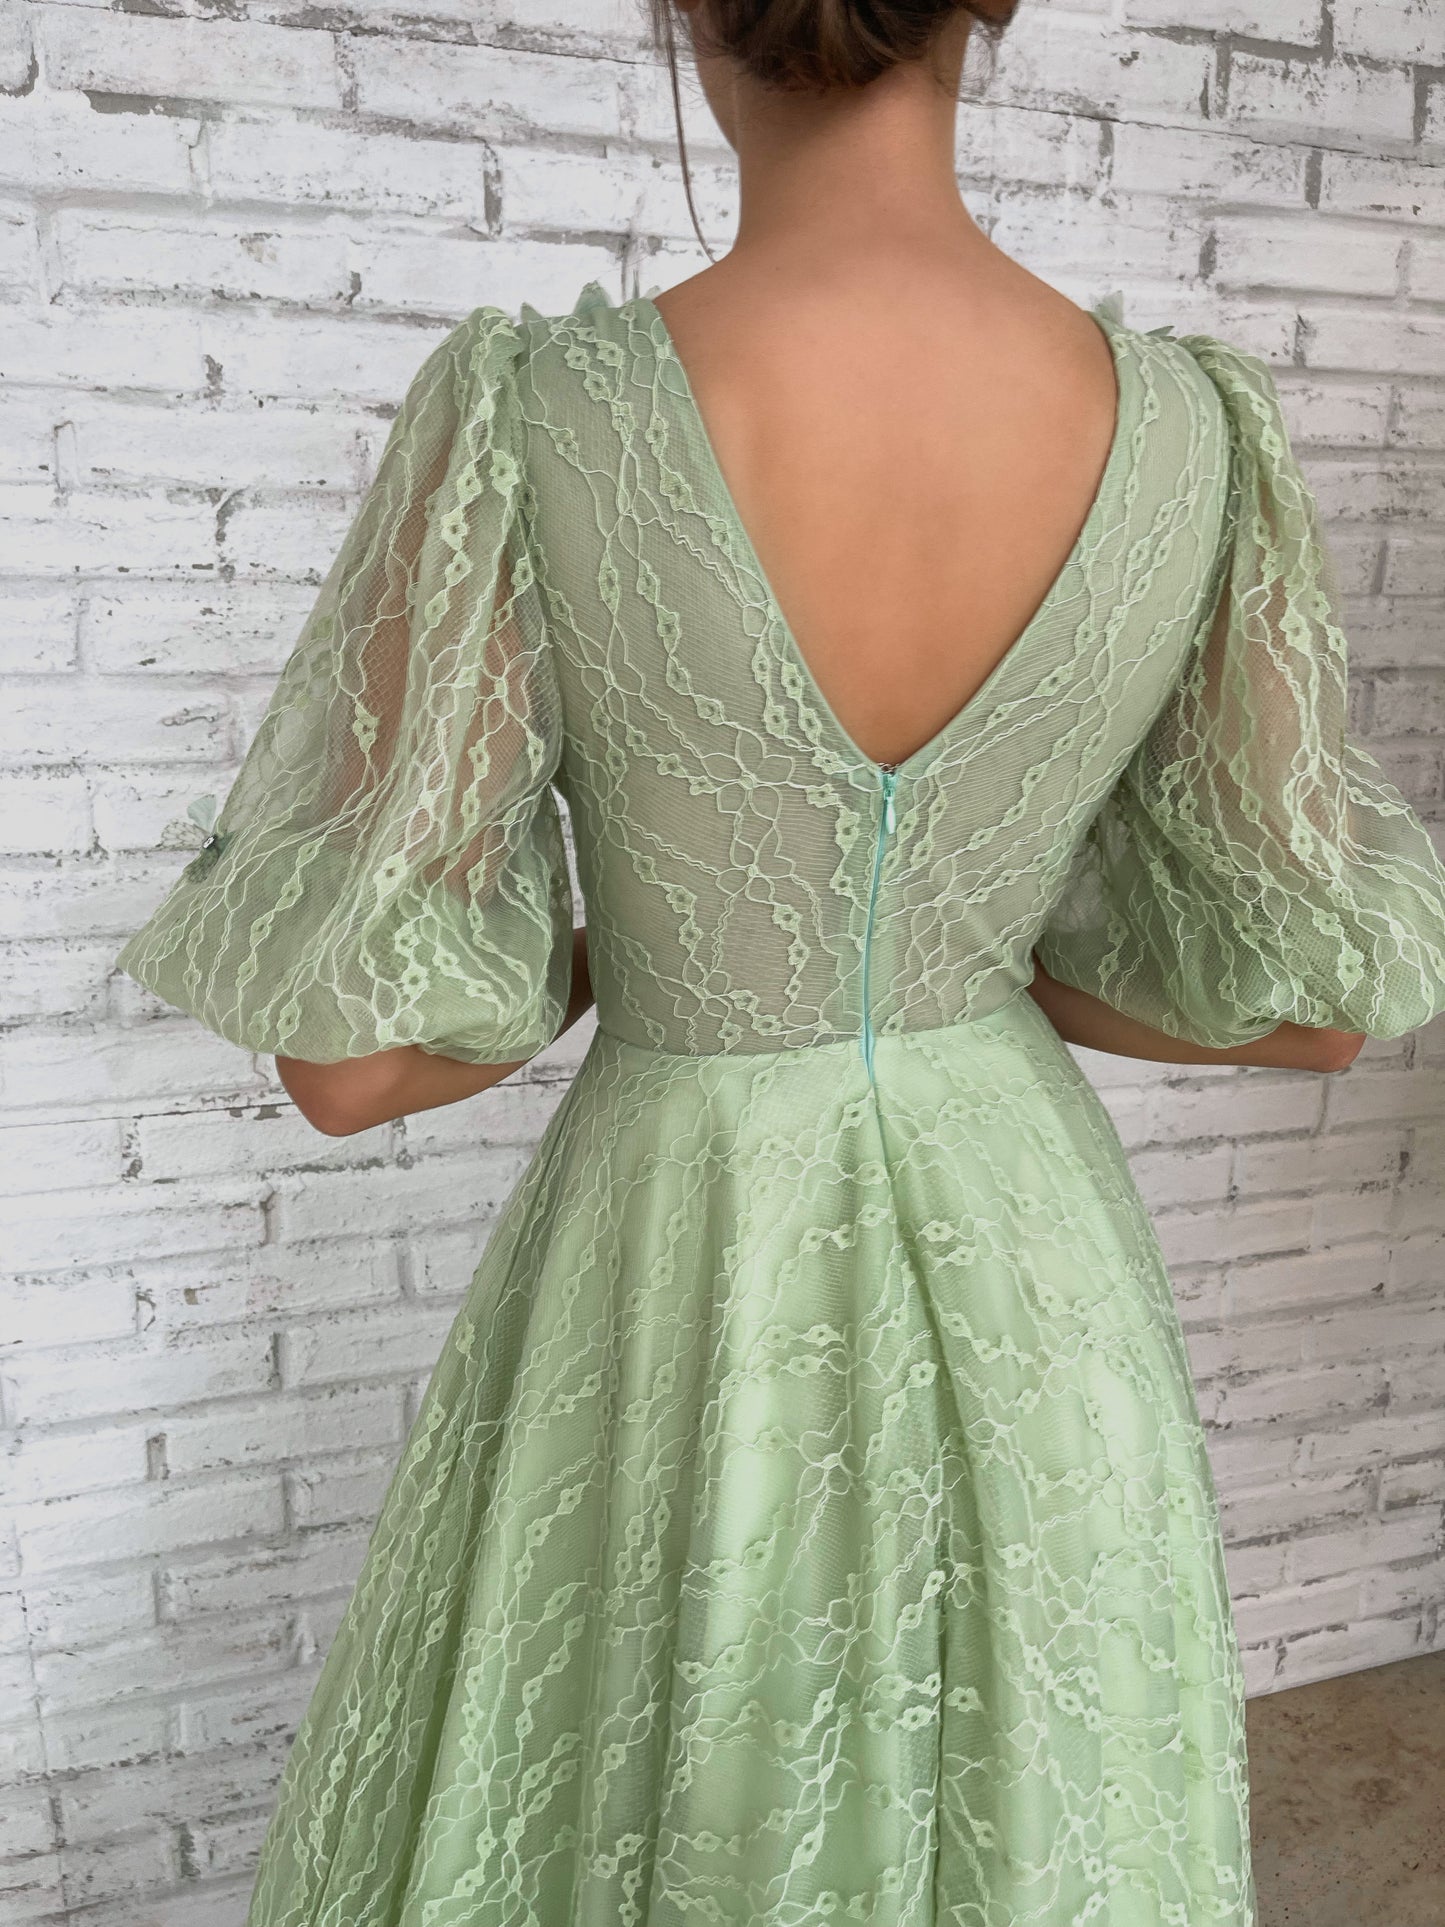 Green A-Line dress with short sleeves, v-neck and embroidery